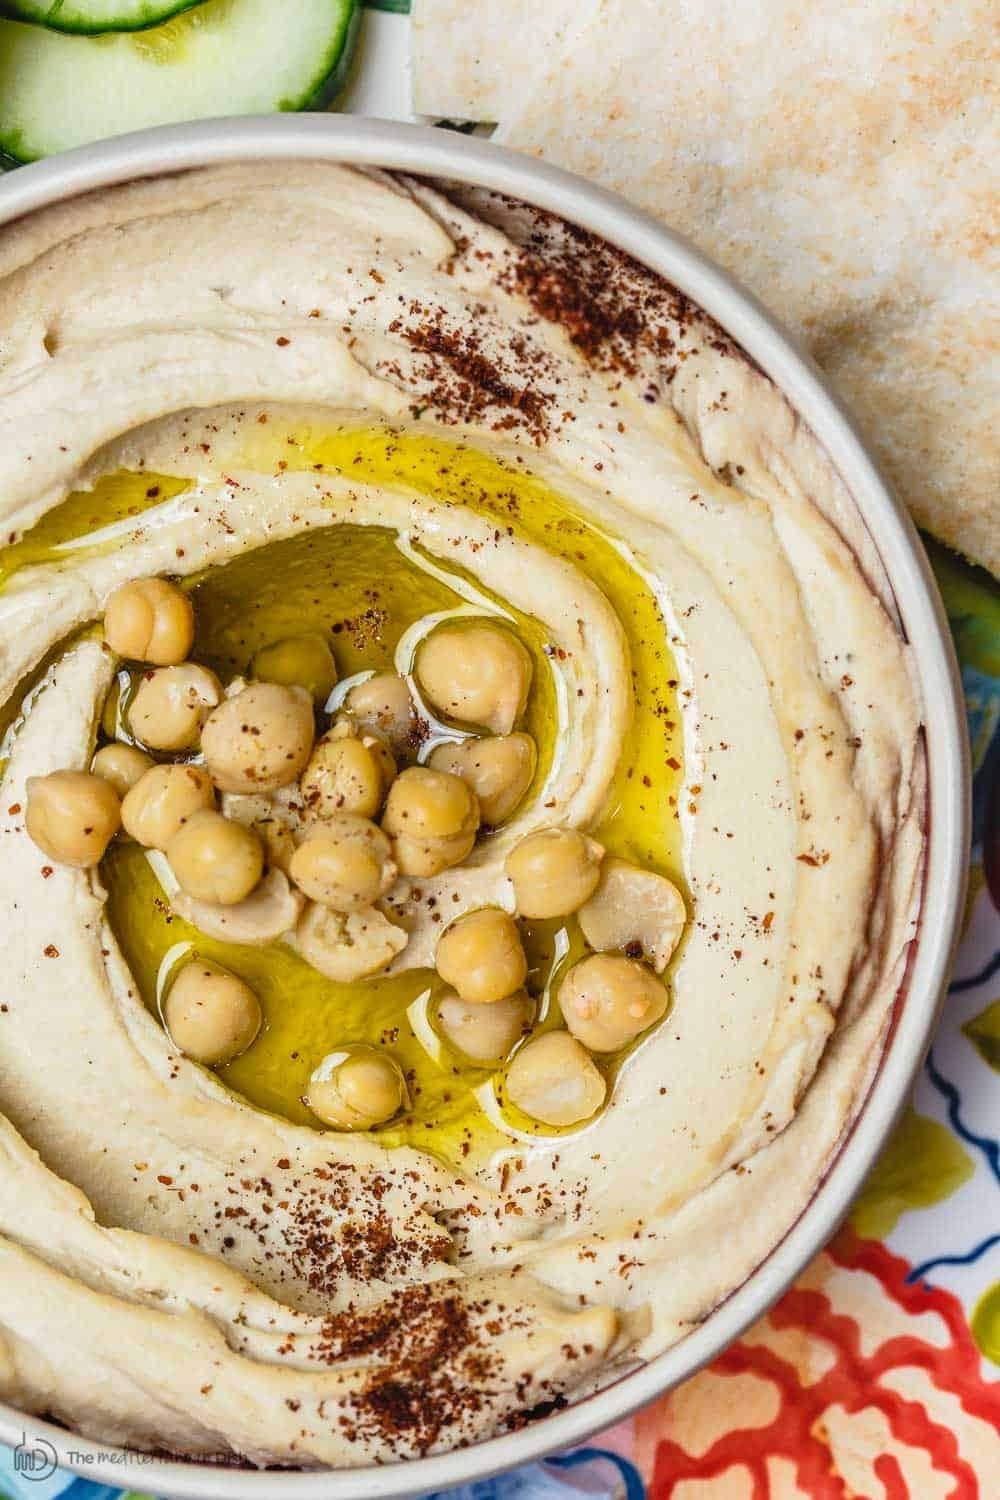 Top view of a bowl of Hummus with chickpeas on top